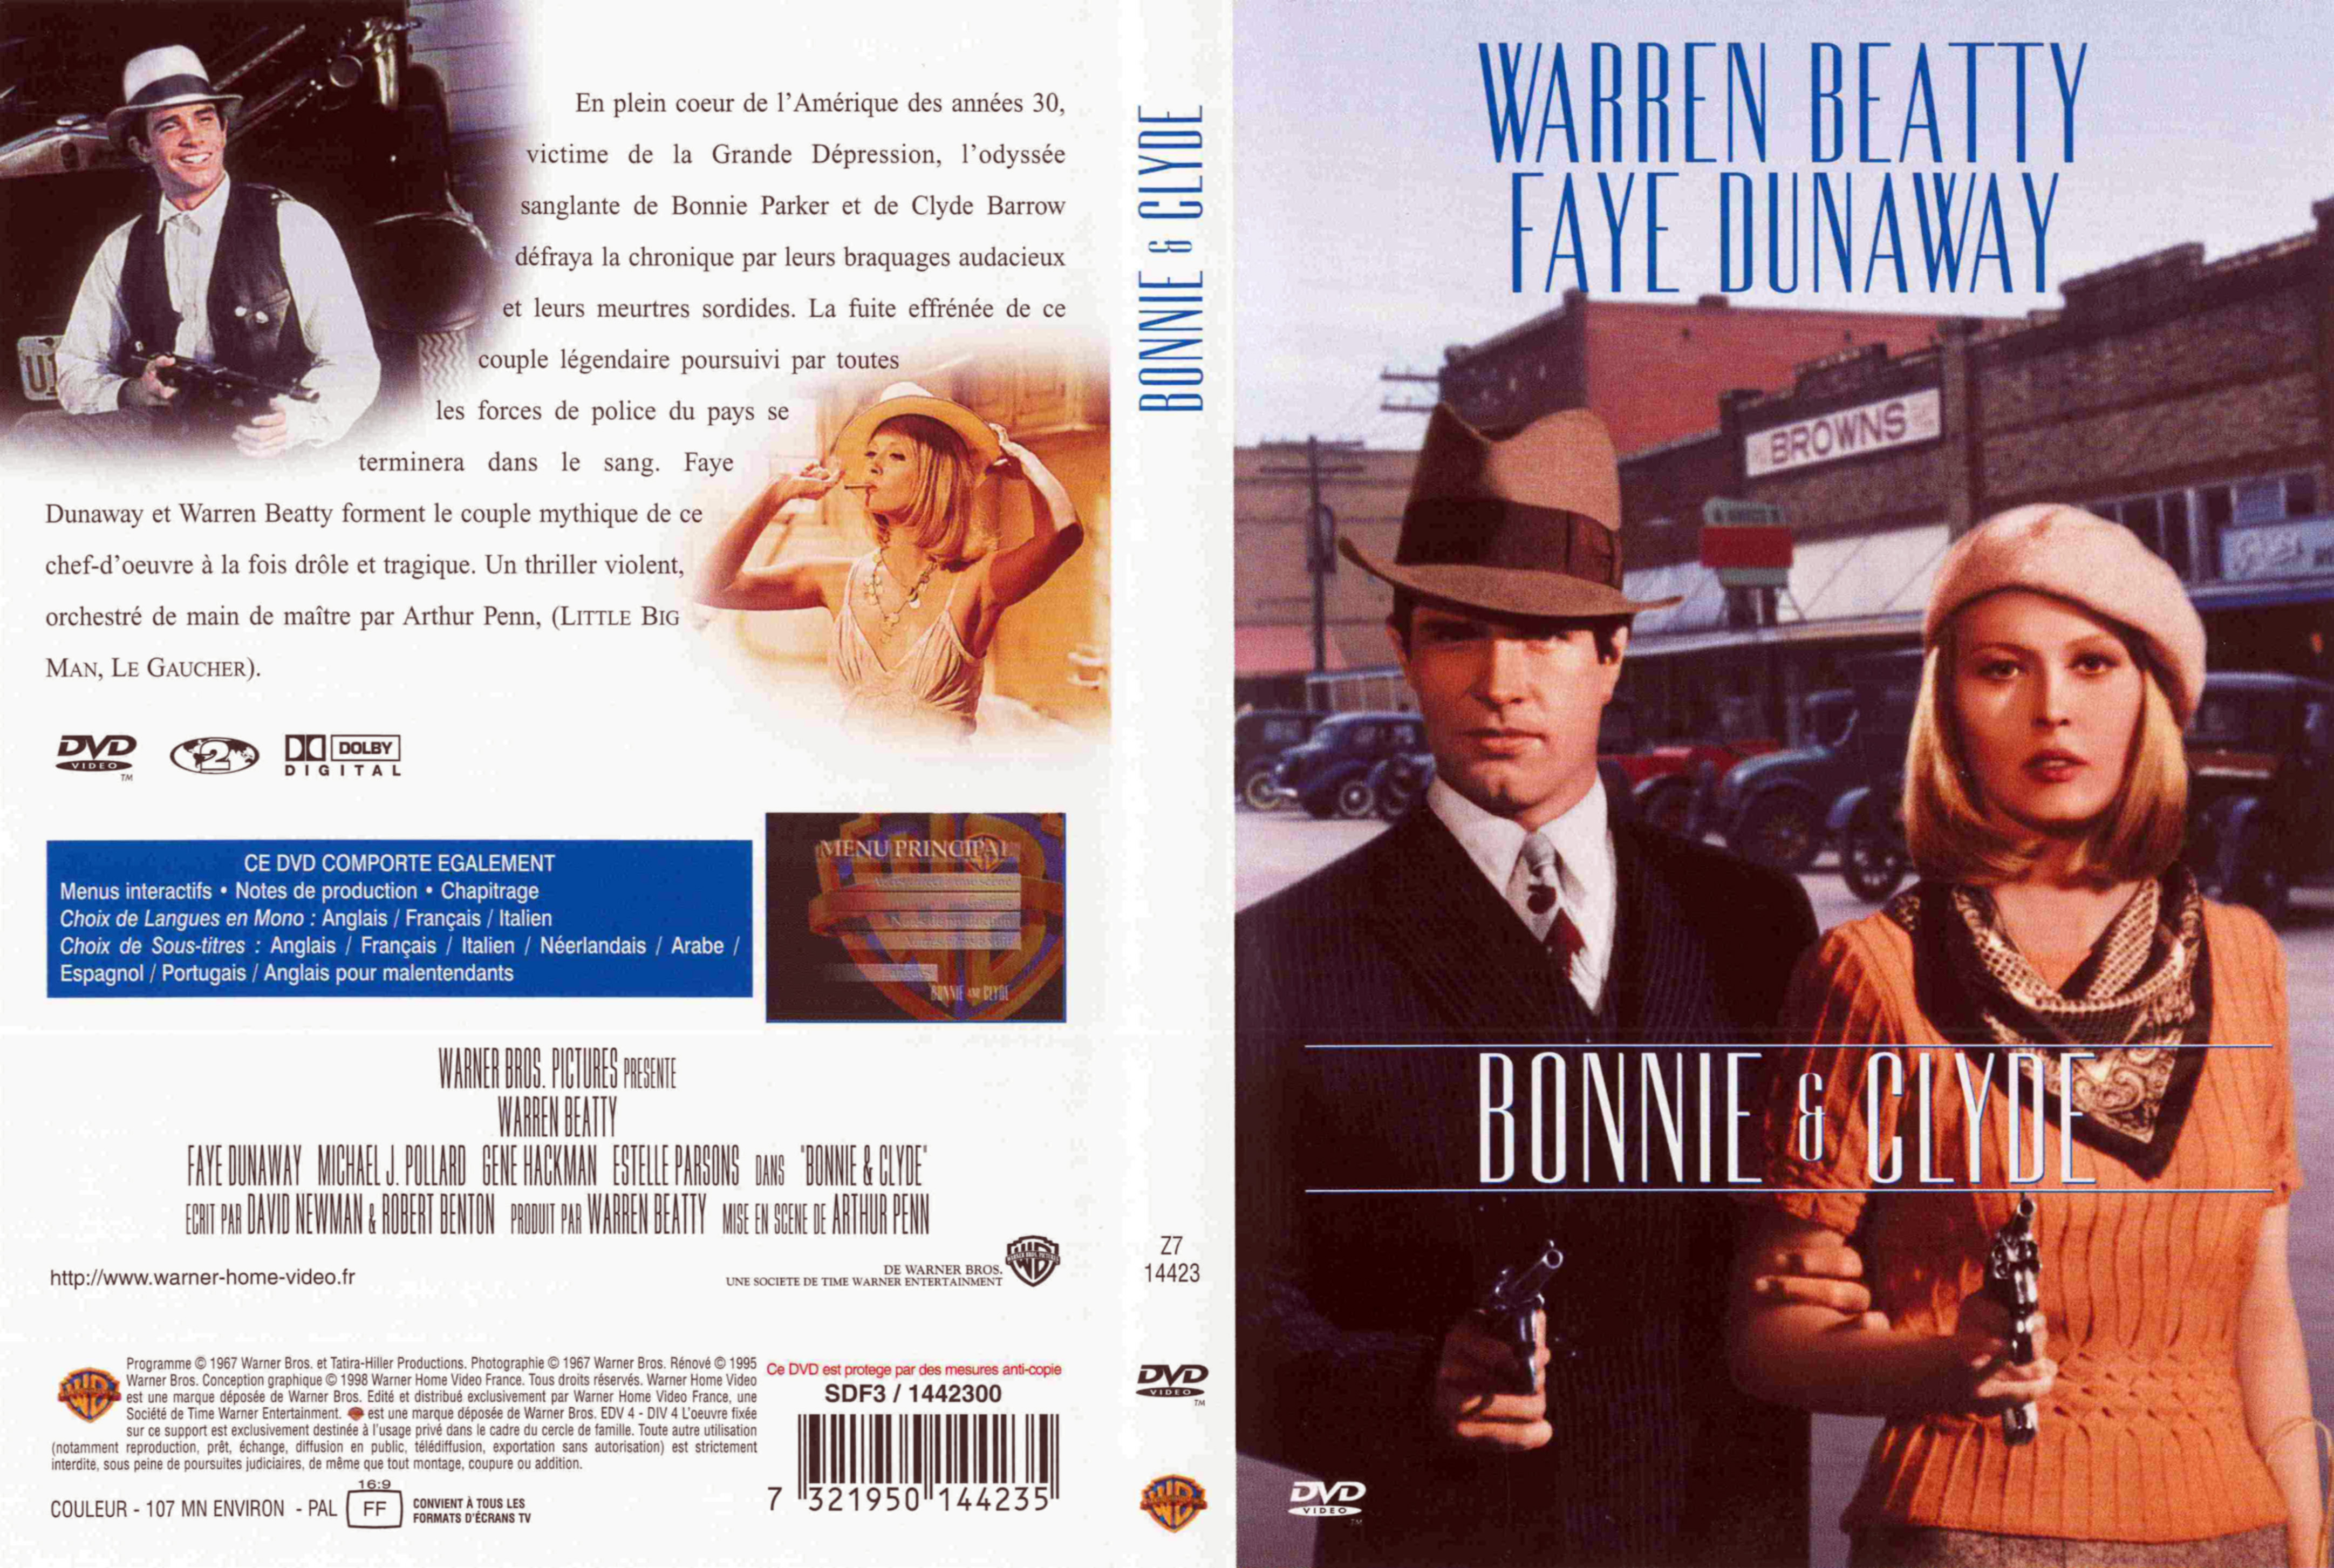 Jaquette DVD Bonnie and Clyde